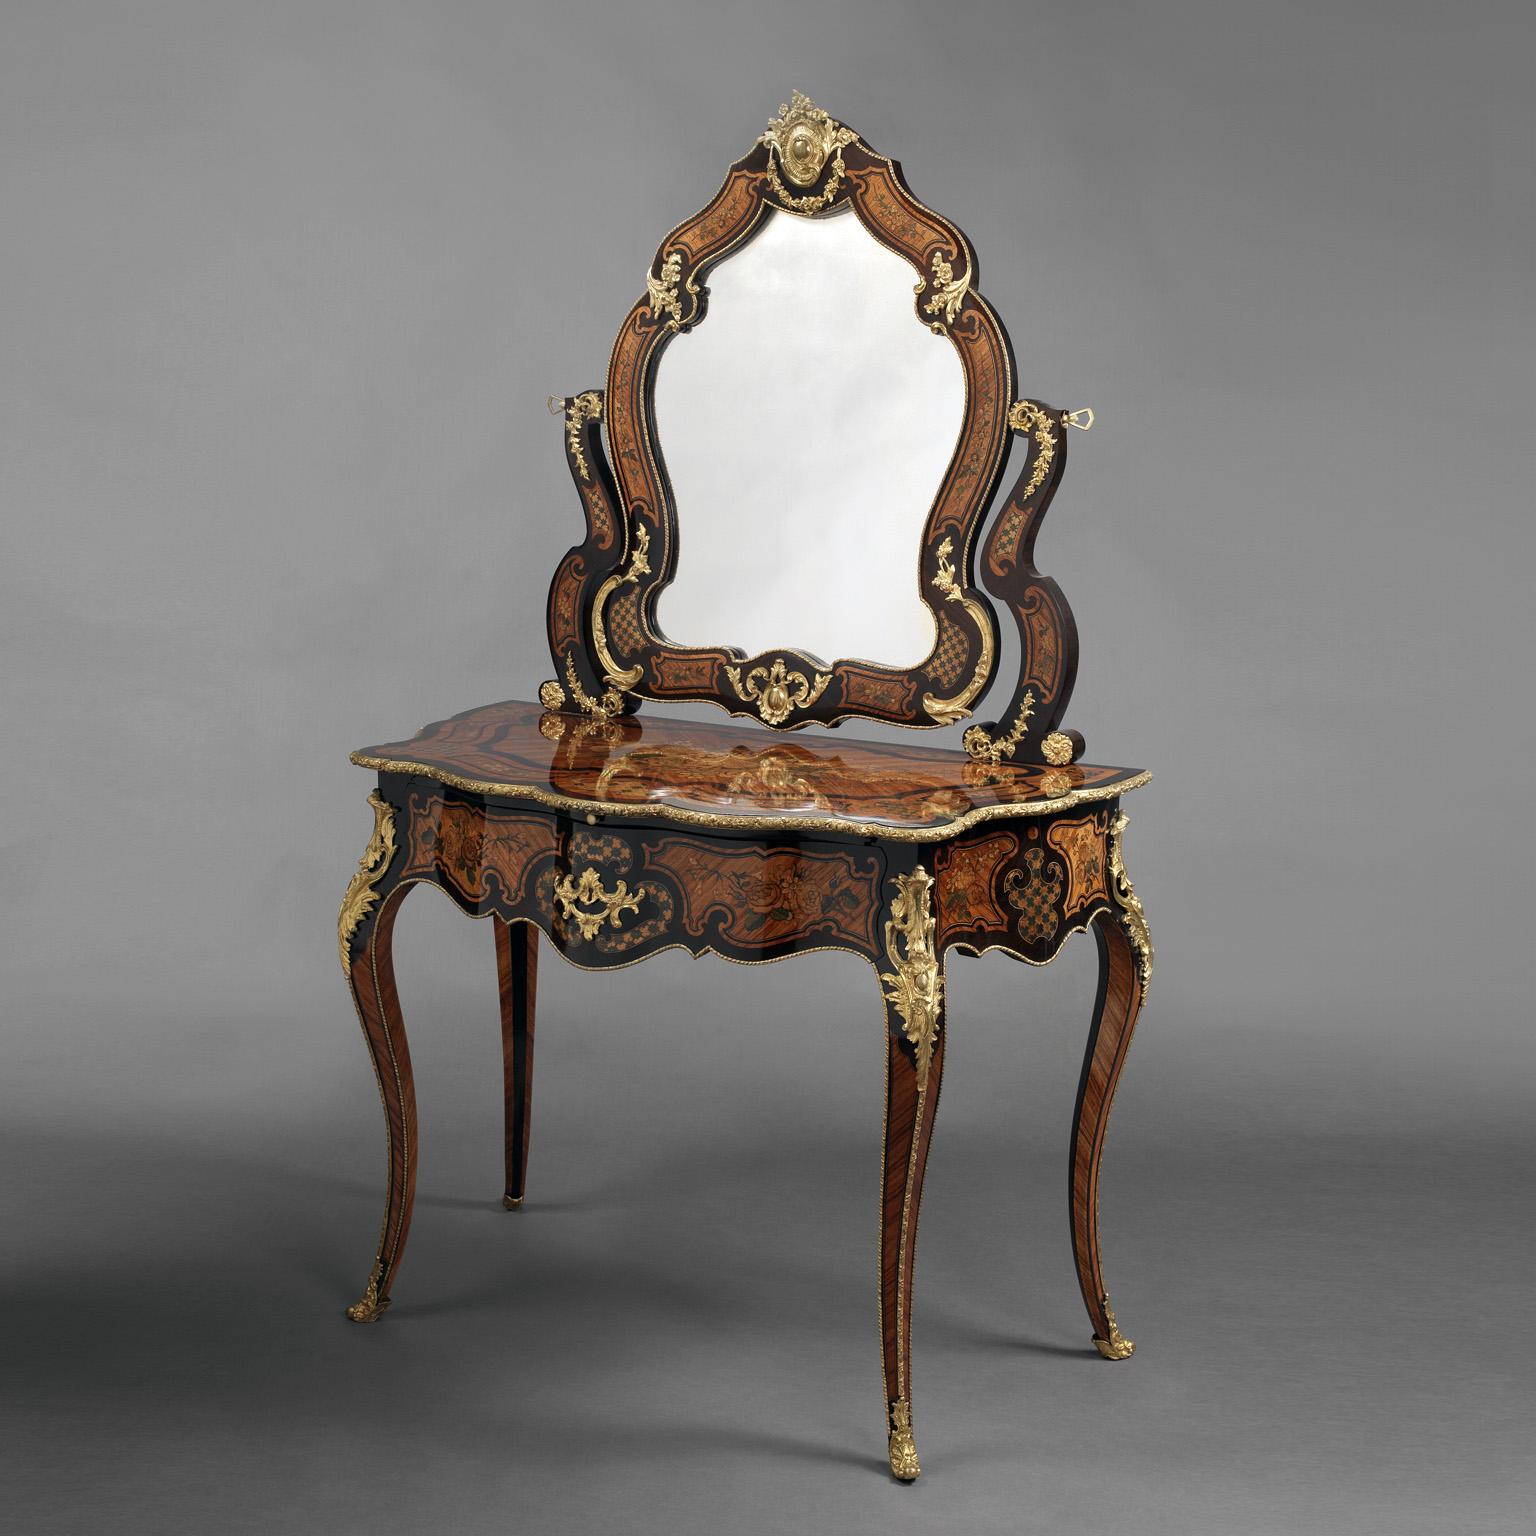 A fine Louis XV style gilt-bronze mounted marquetry inlaid dressing table by Maison Giroux. 

The underside of the drawer with a stencil mark and paper label for 'Alphonse Giroux & Cie'. 

This rare dressing table is inlaid all over with very